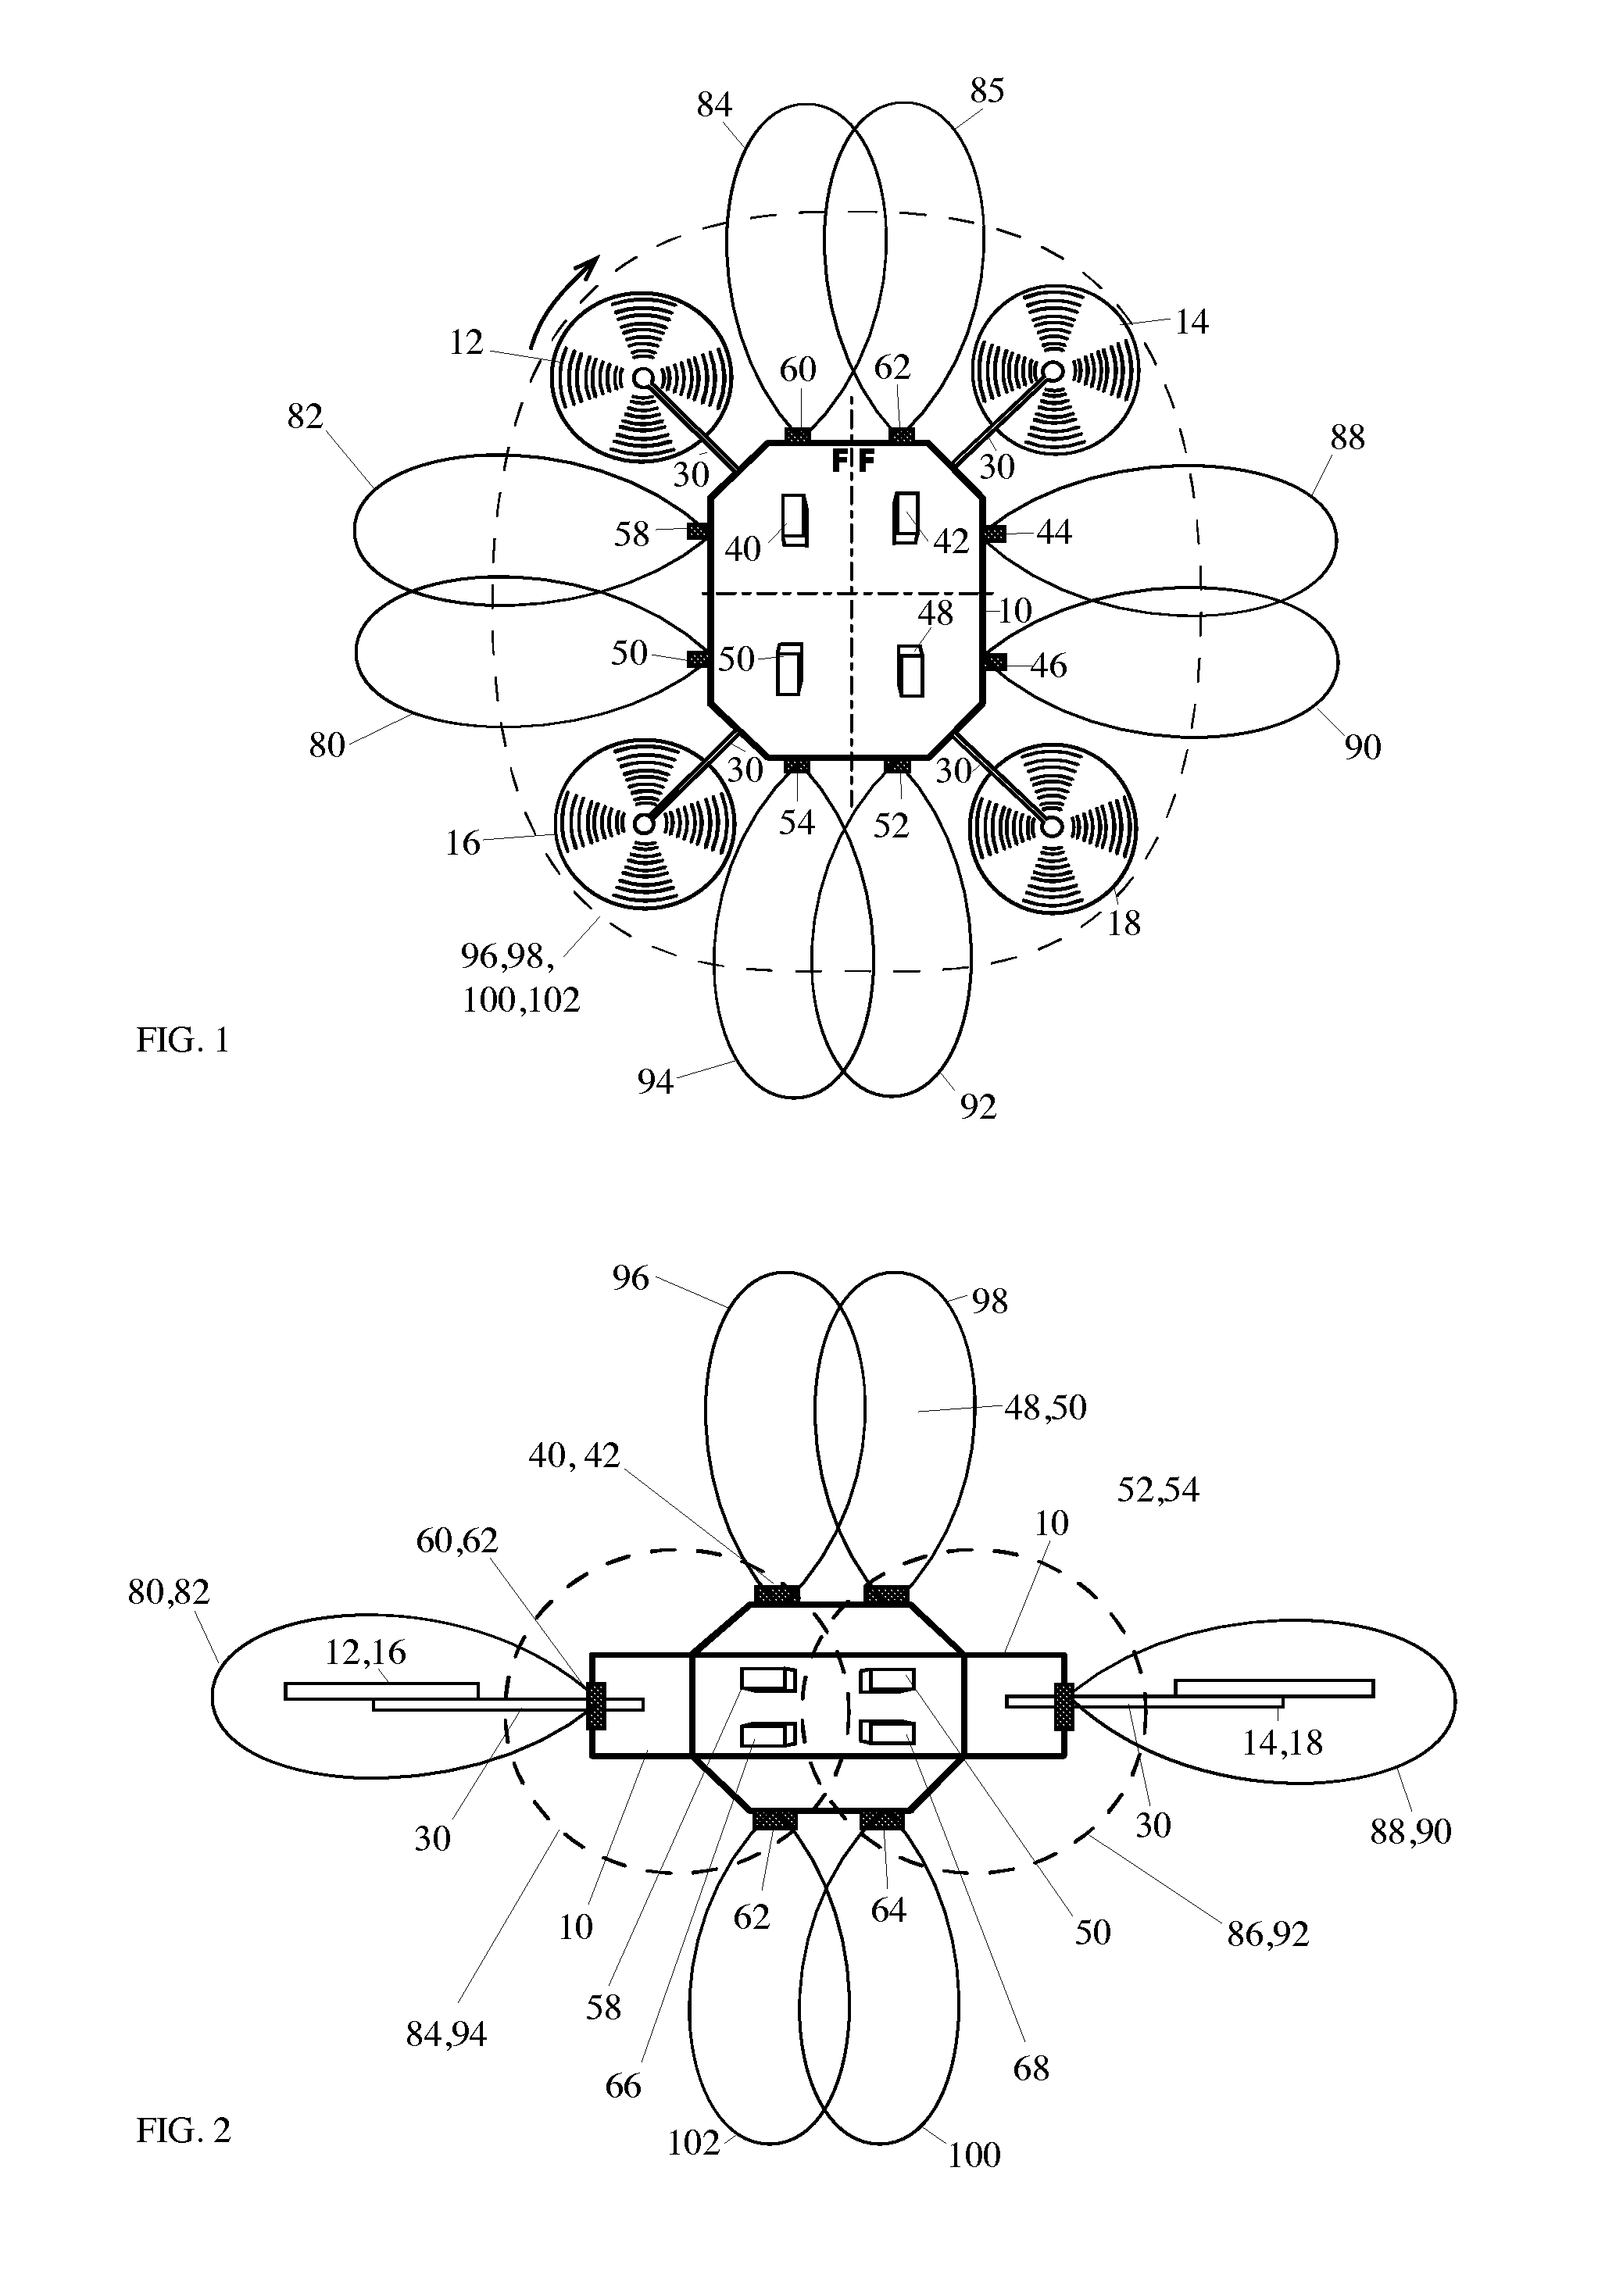 Micro unmanned aerial vehicle and method of control therefor